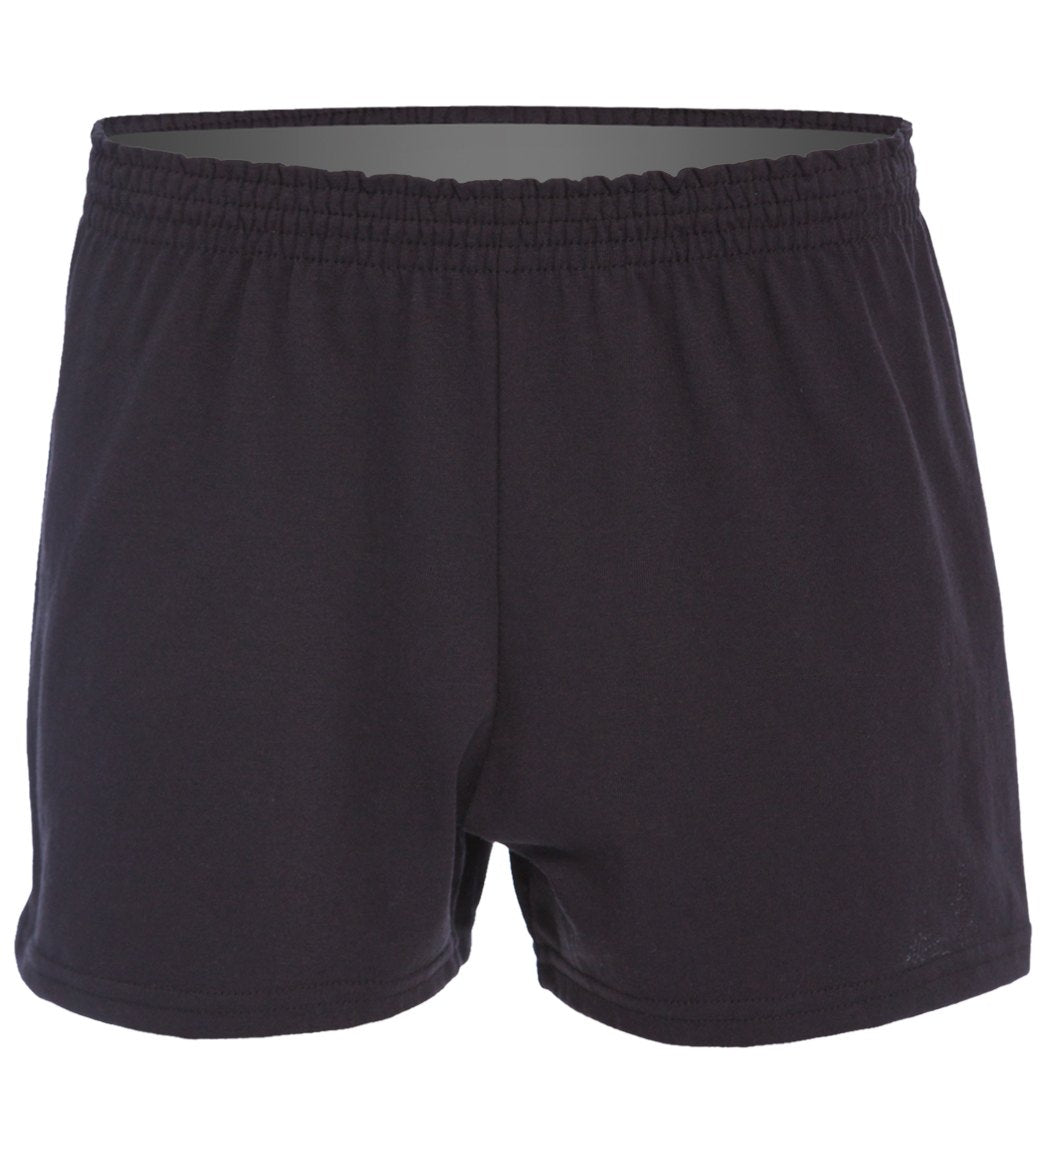 Custom Women's Fitted Jersey Short - Black X-Small Cotton/Polyester - Swimoutlet.com